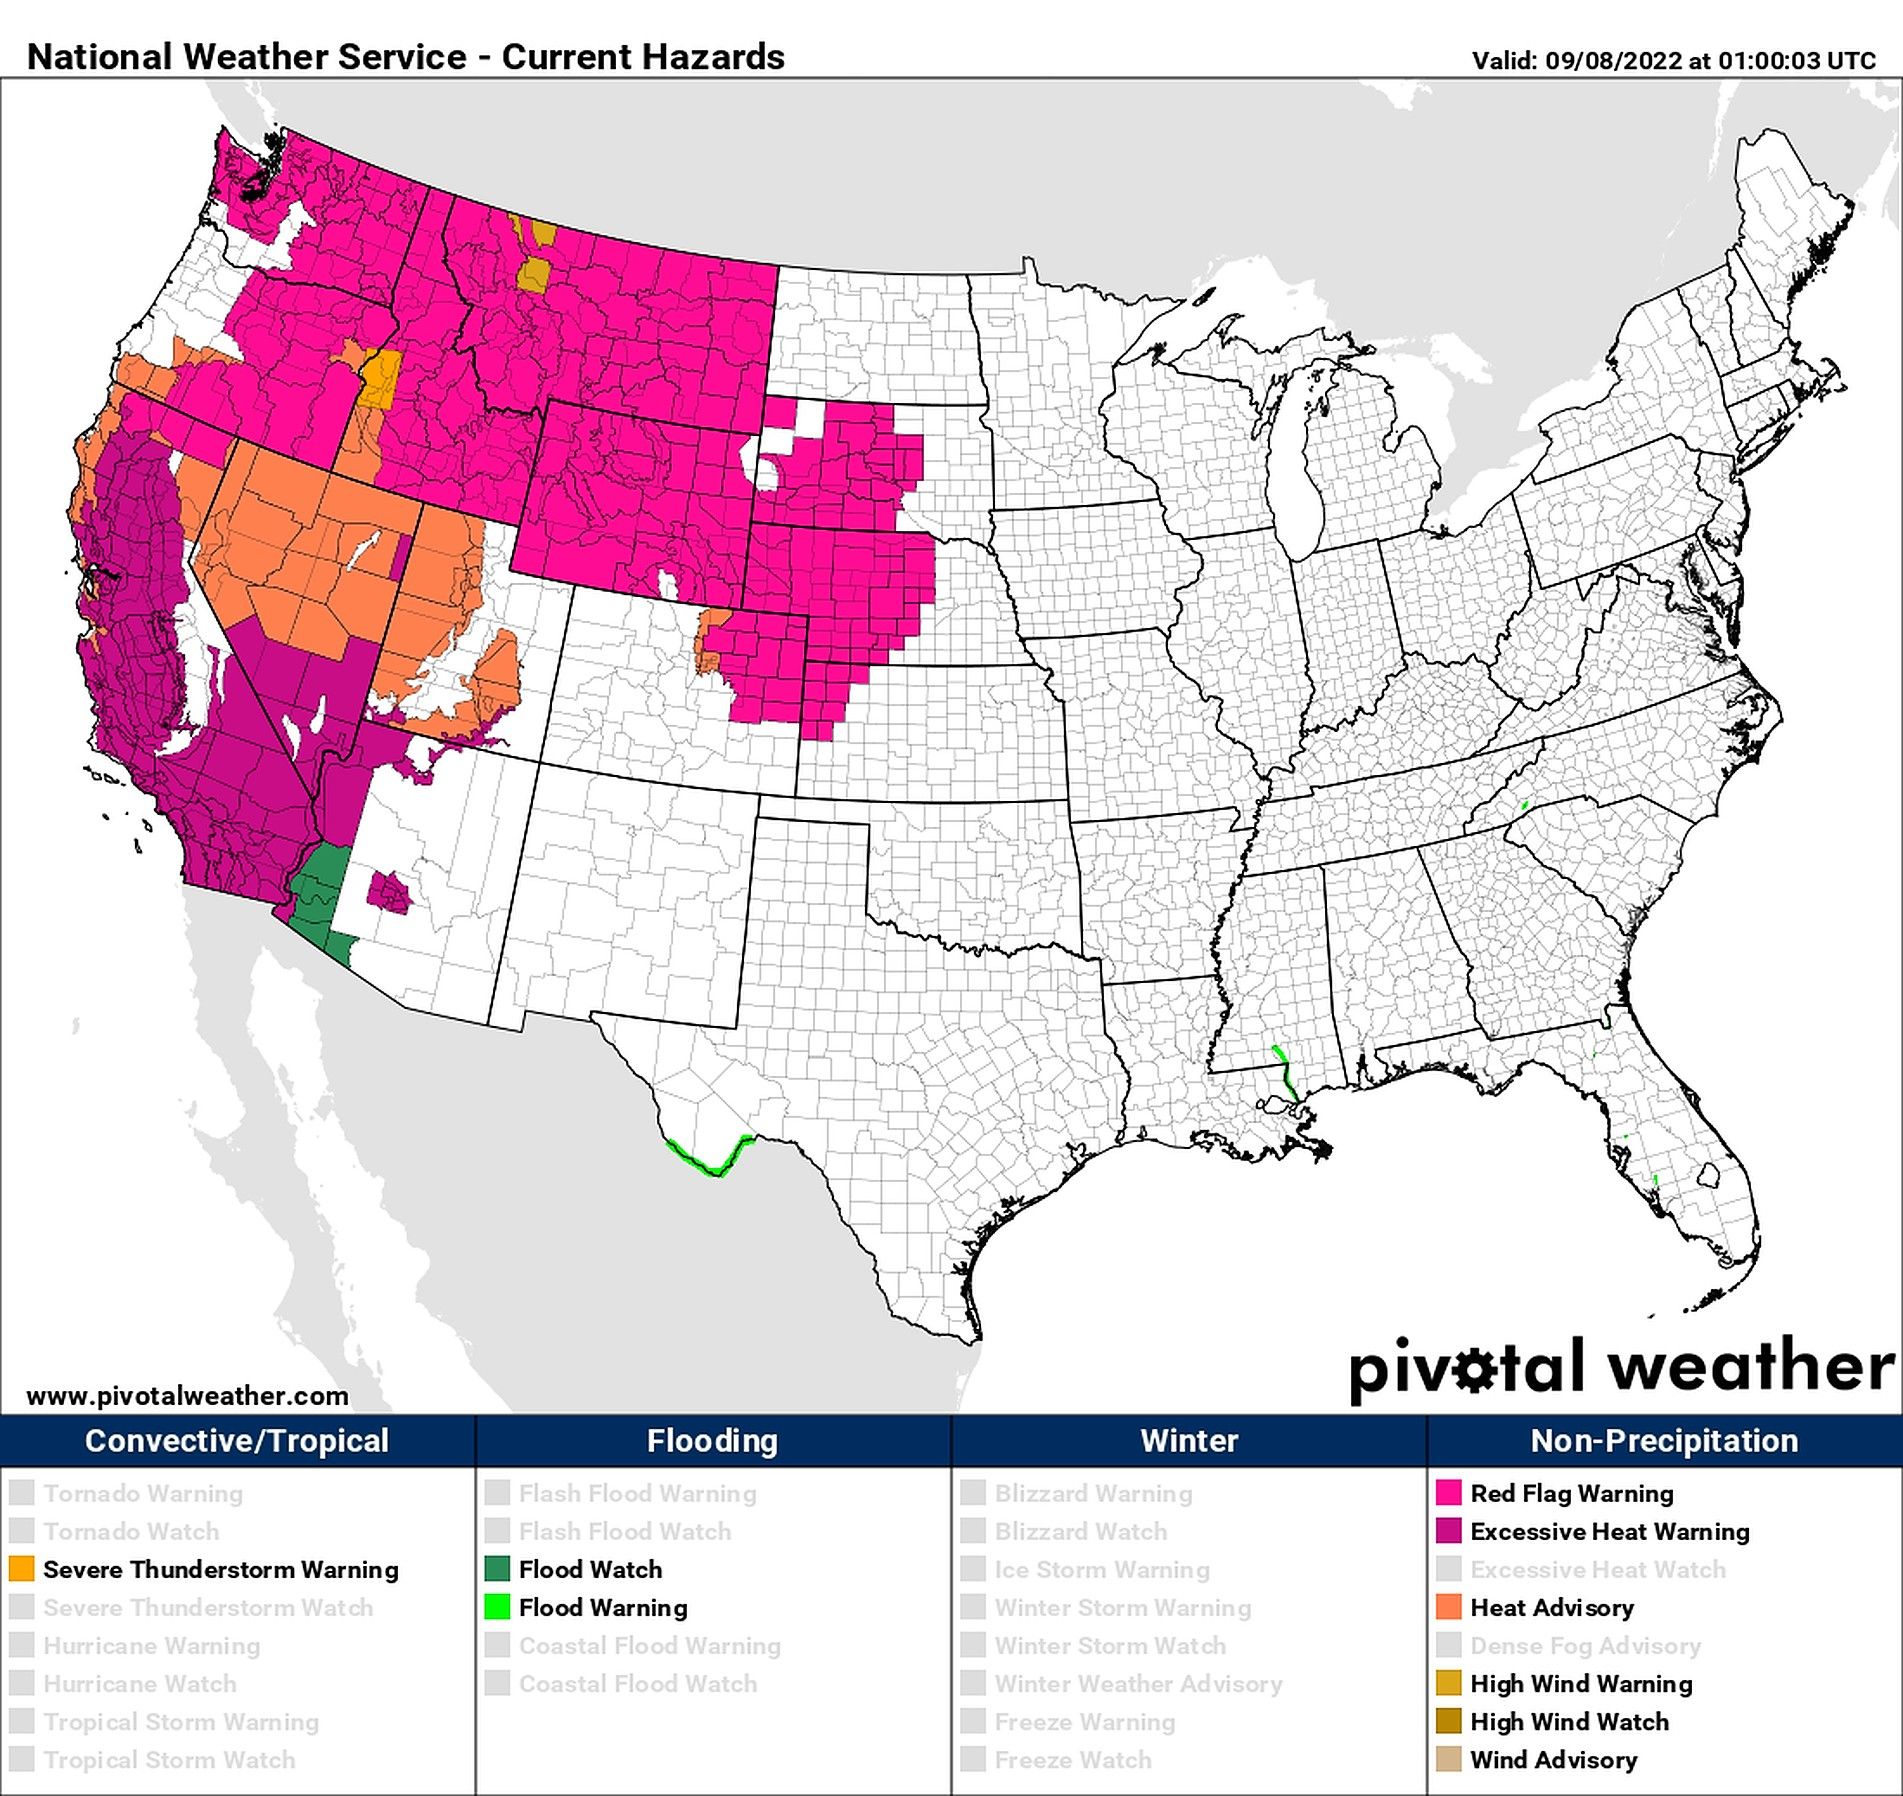 A map showing hazards across the U.S. West identified by the National Weather Service, including red flag warnings.